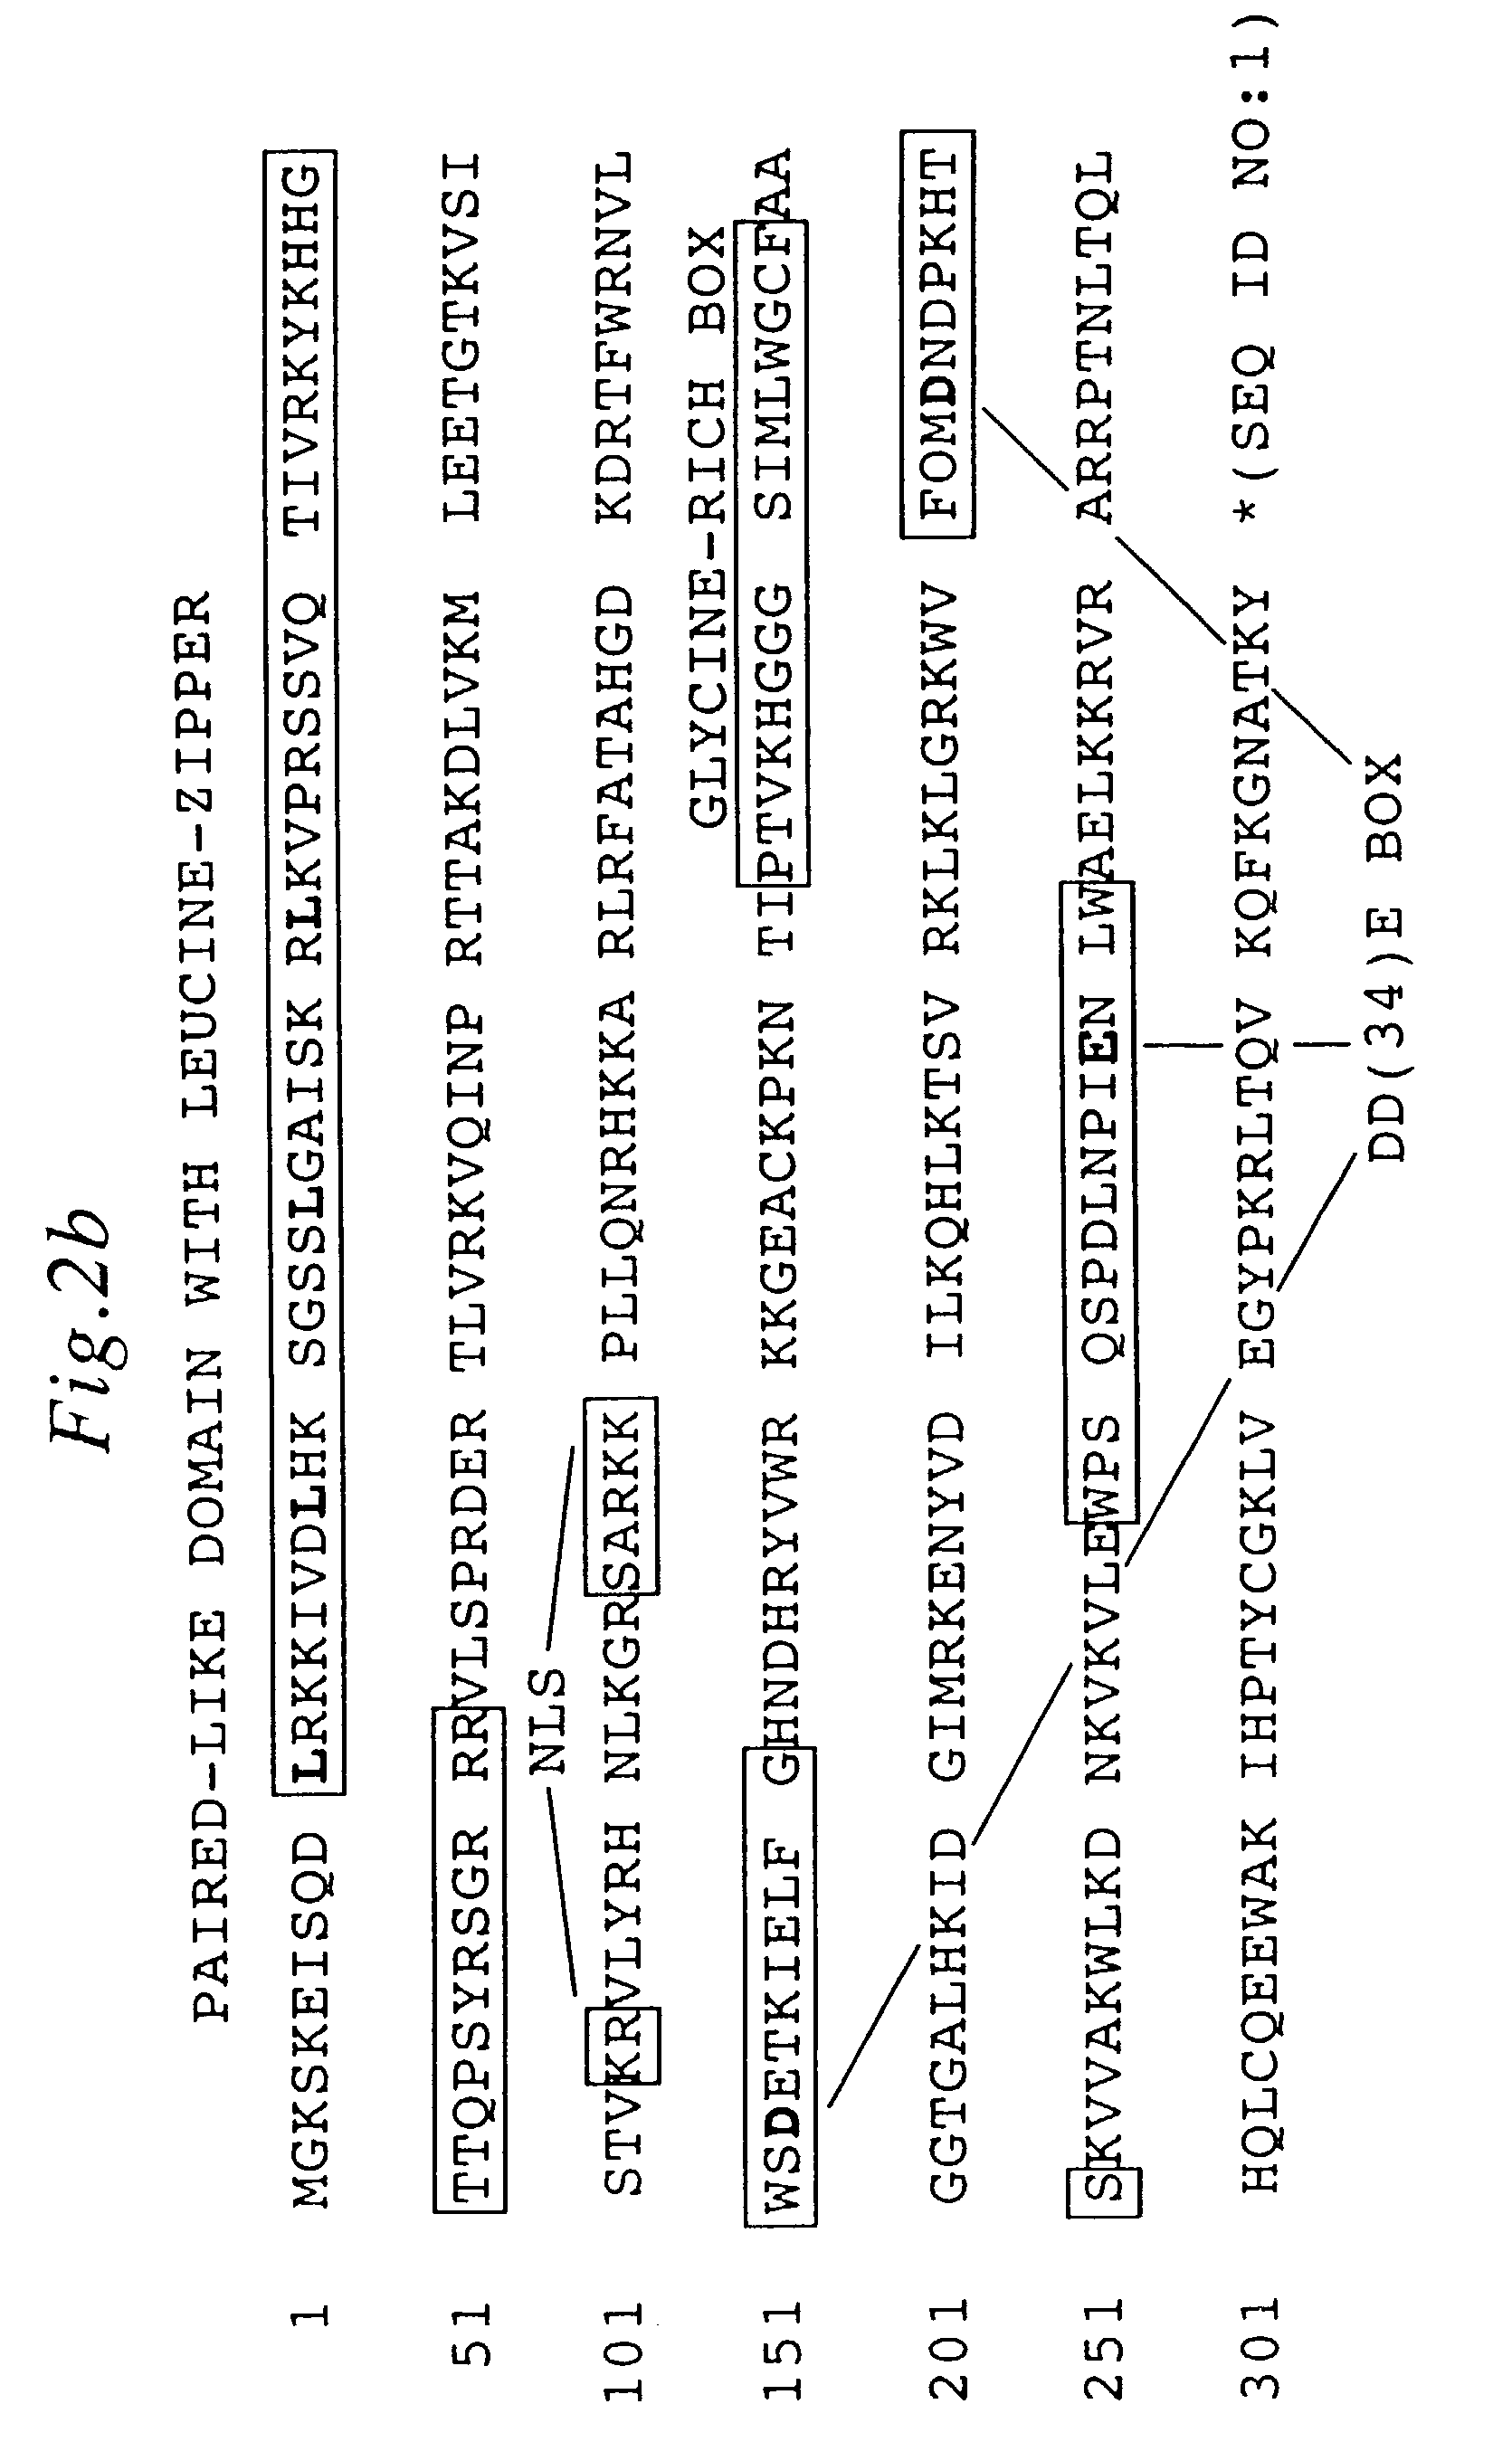 Nucleic acid transfer vector for the introduction of nucleic acid into the DNA of a cell